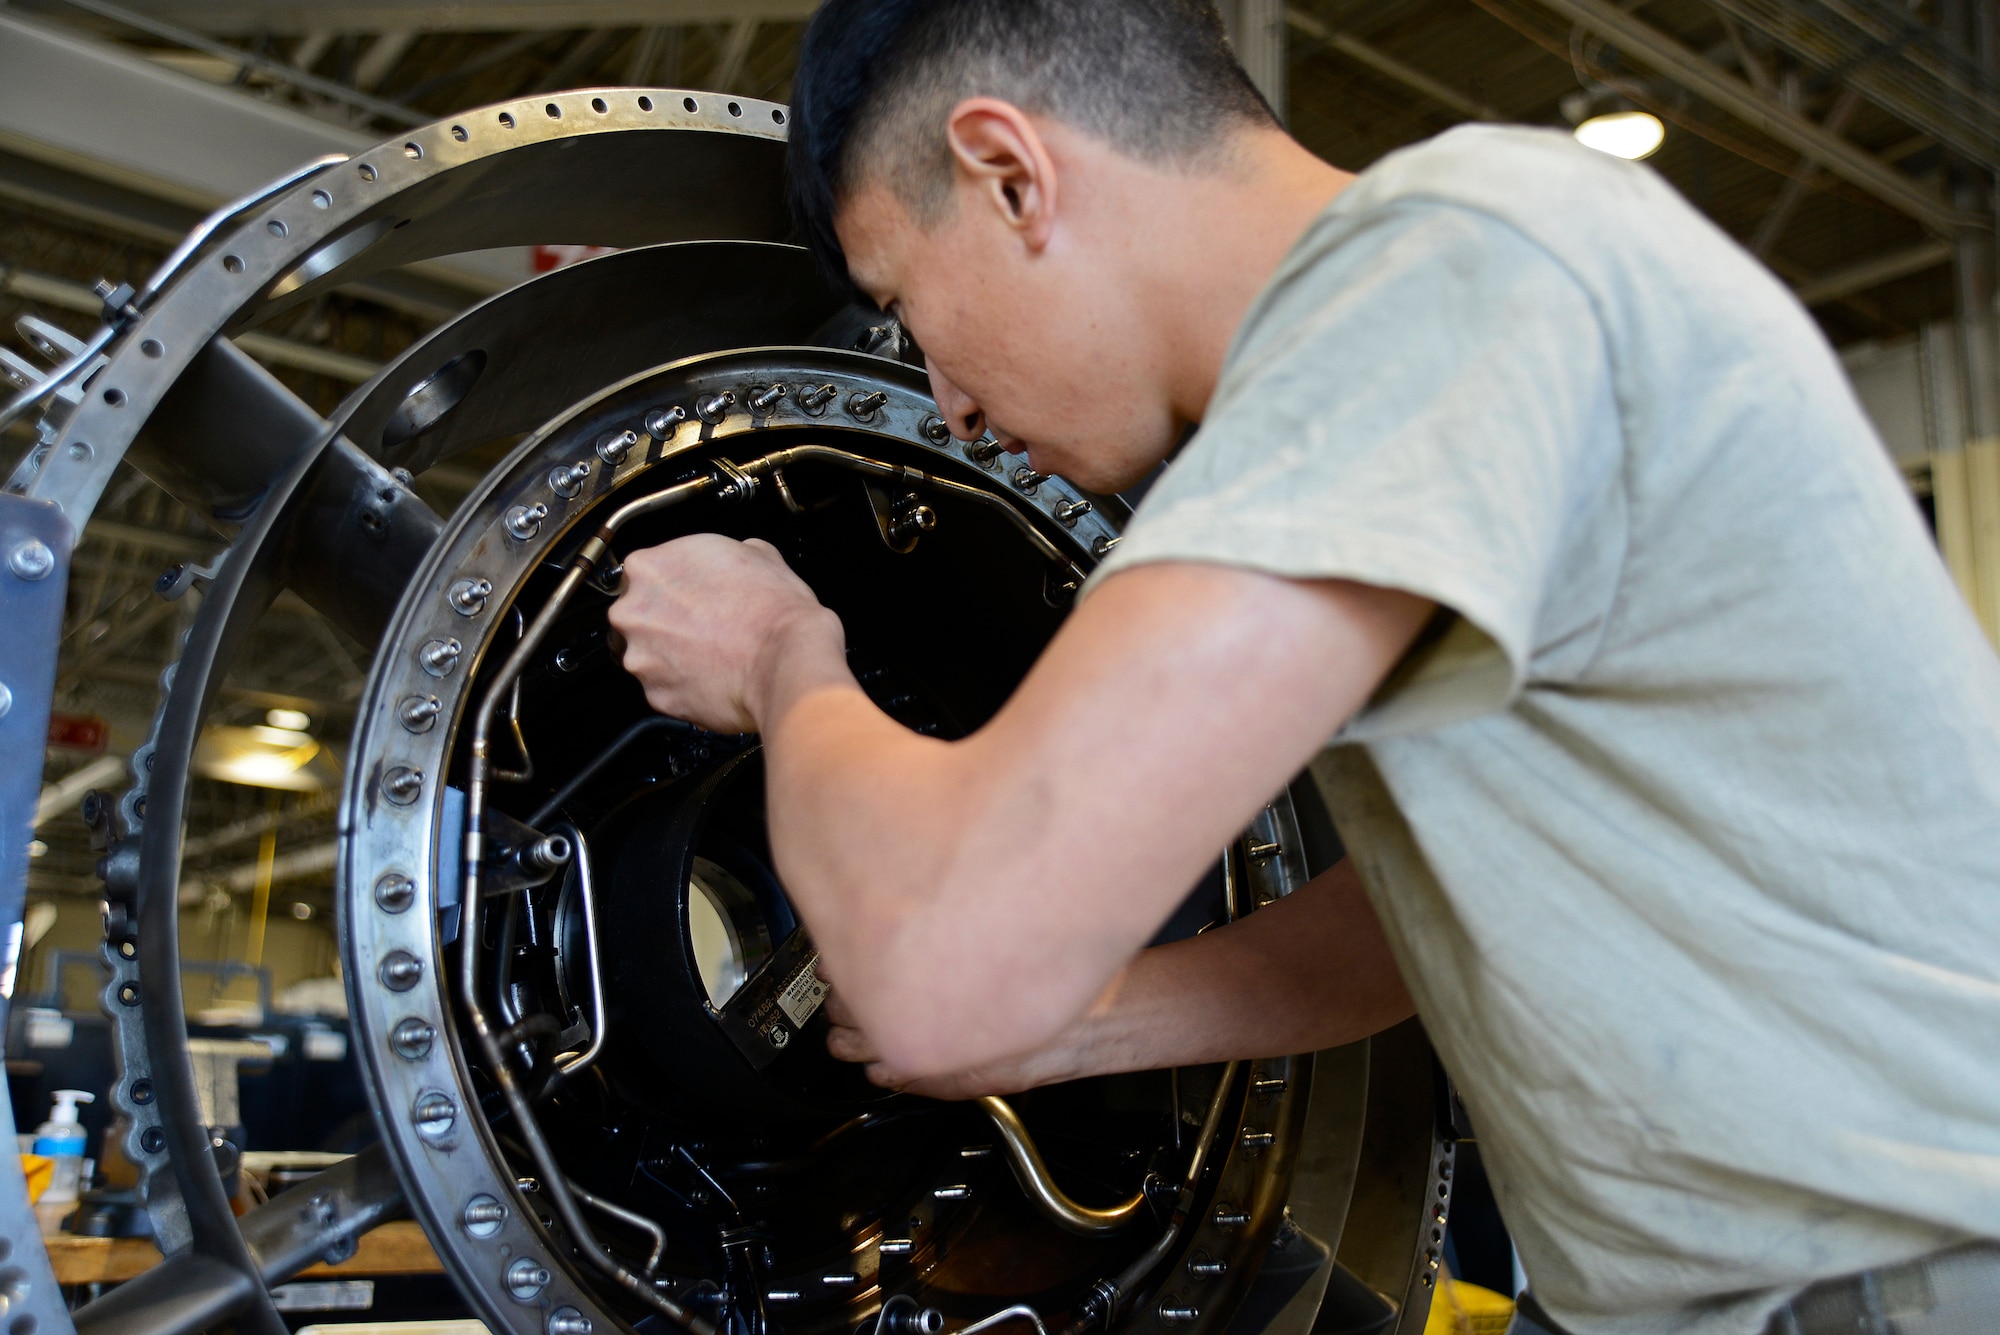 U.S. Air Force Senior Airman Monhuan Lee, 20th Component Maintenance Squadron aerospace propulsion journeyman, tightens a bolt on a fan frame at Shaw Air Force Base, S.C., March 29, 2017. The fan frame makes up part of the F110-129D engine as a support fan. (U.S. Air Force photo by Airman 1st Class BrieAnna Stillman)